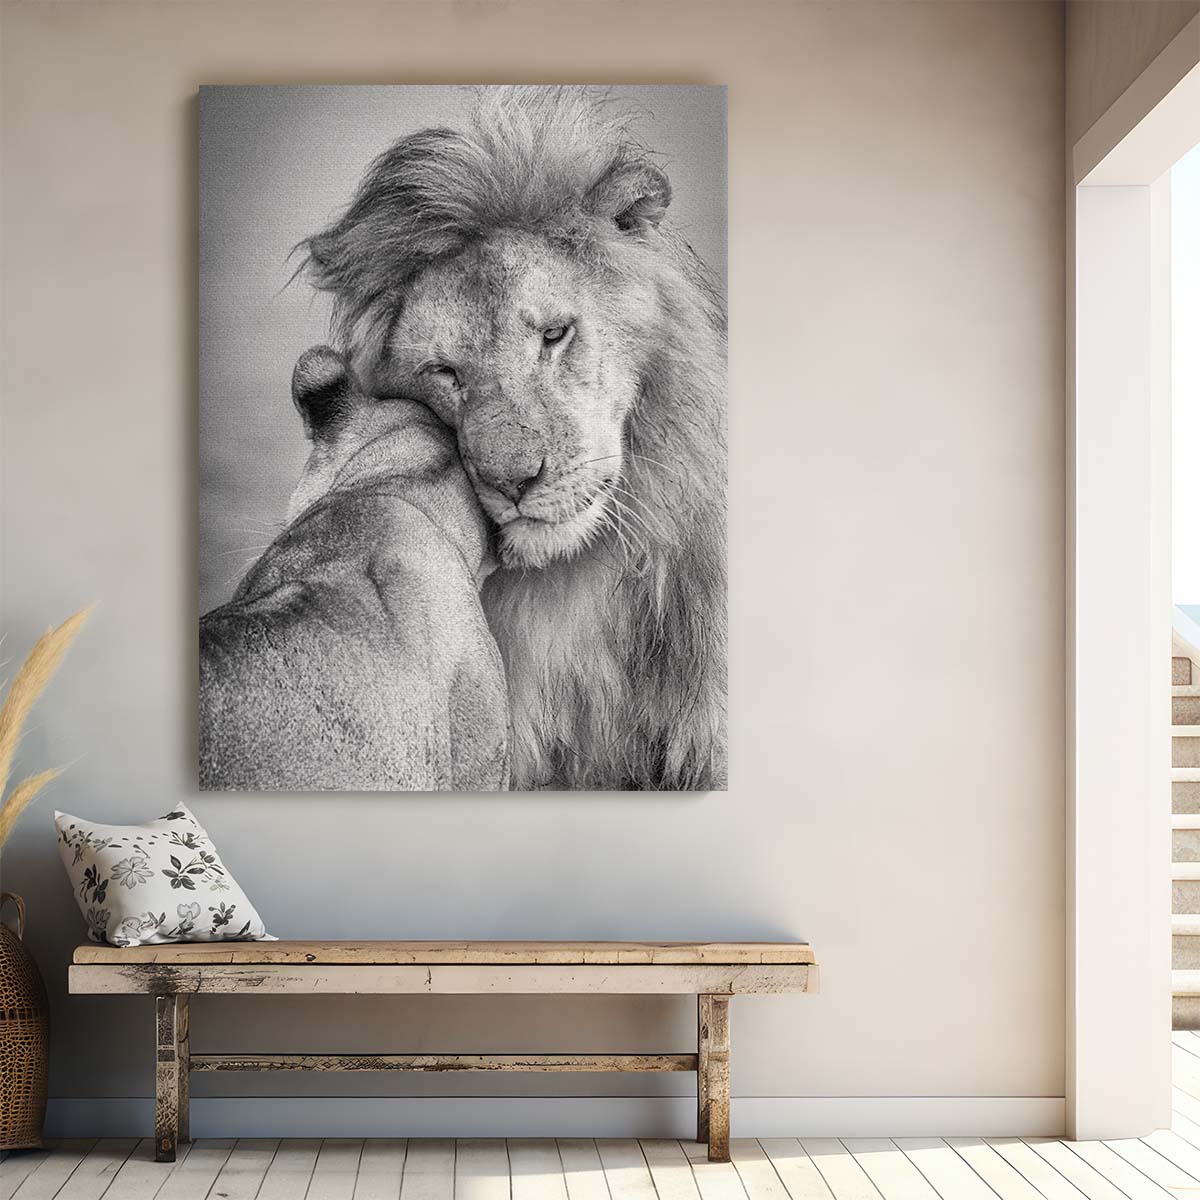 Romantic Lion Couple in Tanzania Wildlife Photography Wall Art by Luxuriance Designs, made in USA